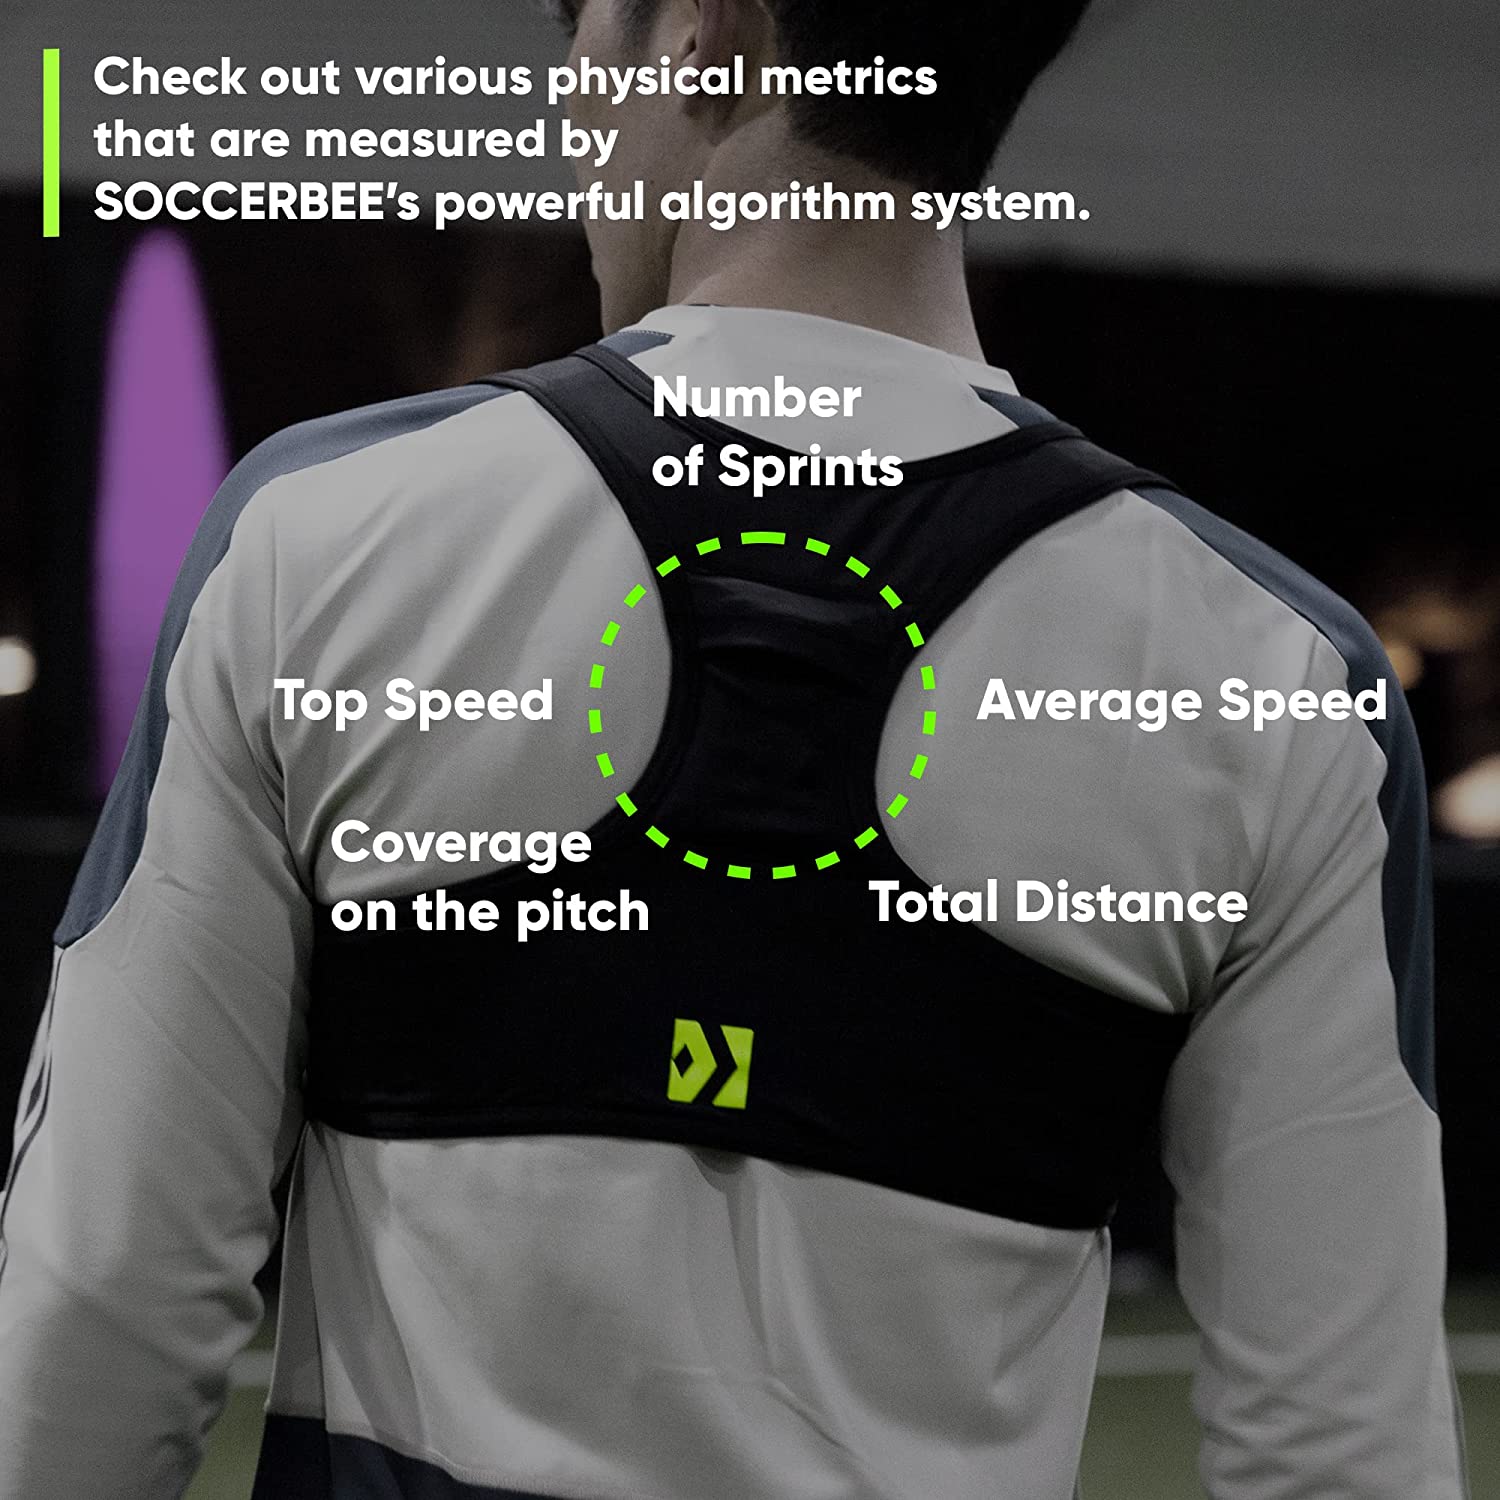 Players using the vest for GPS device support